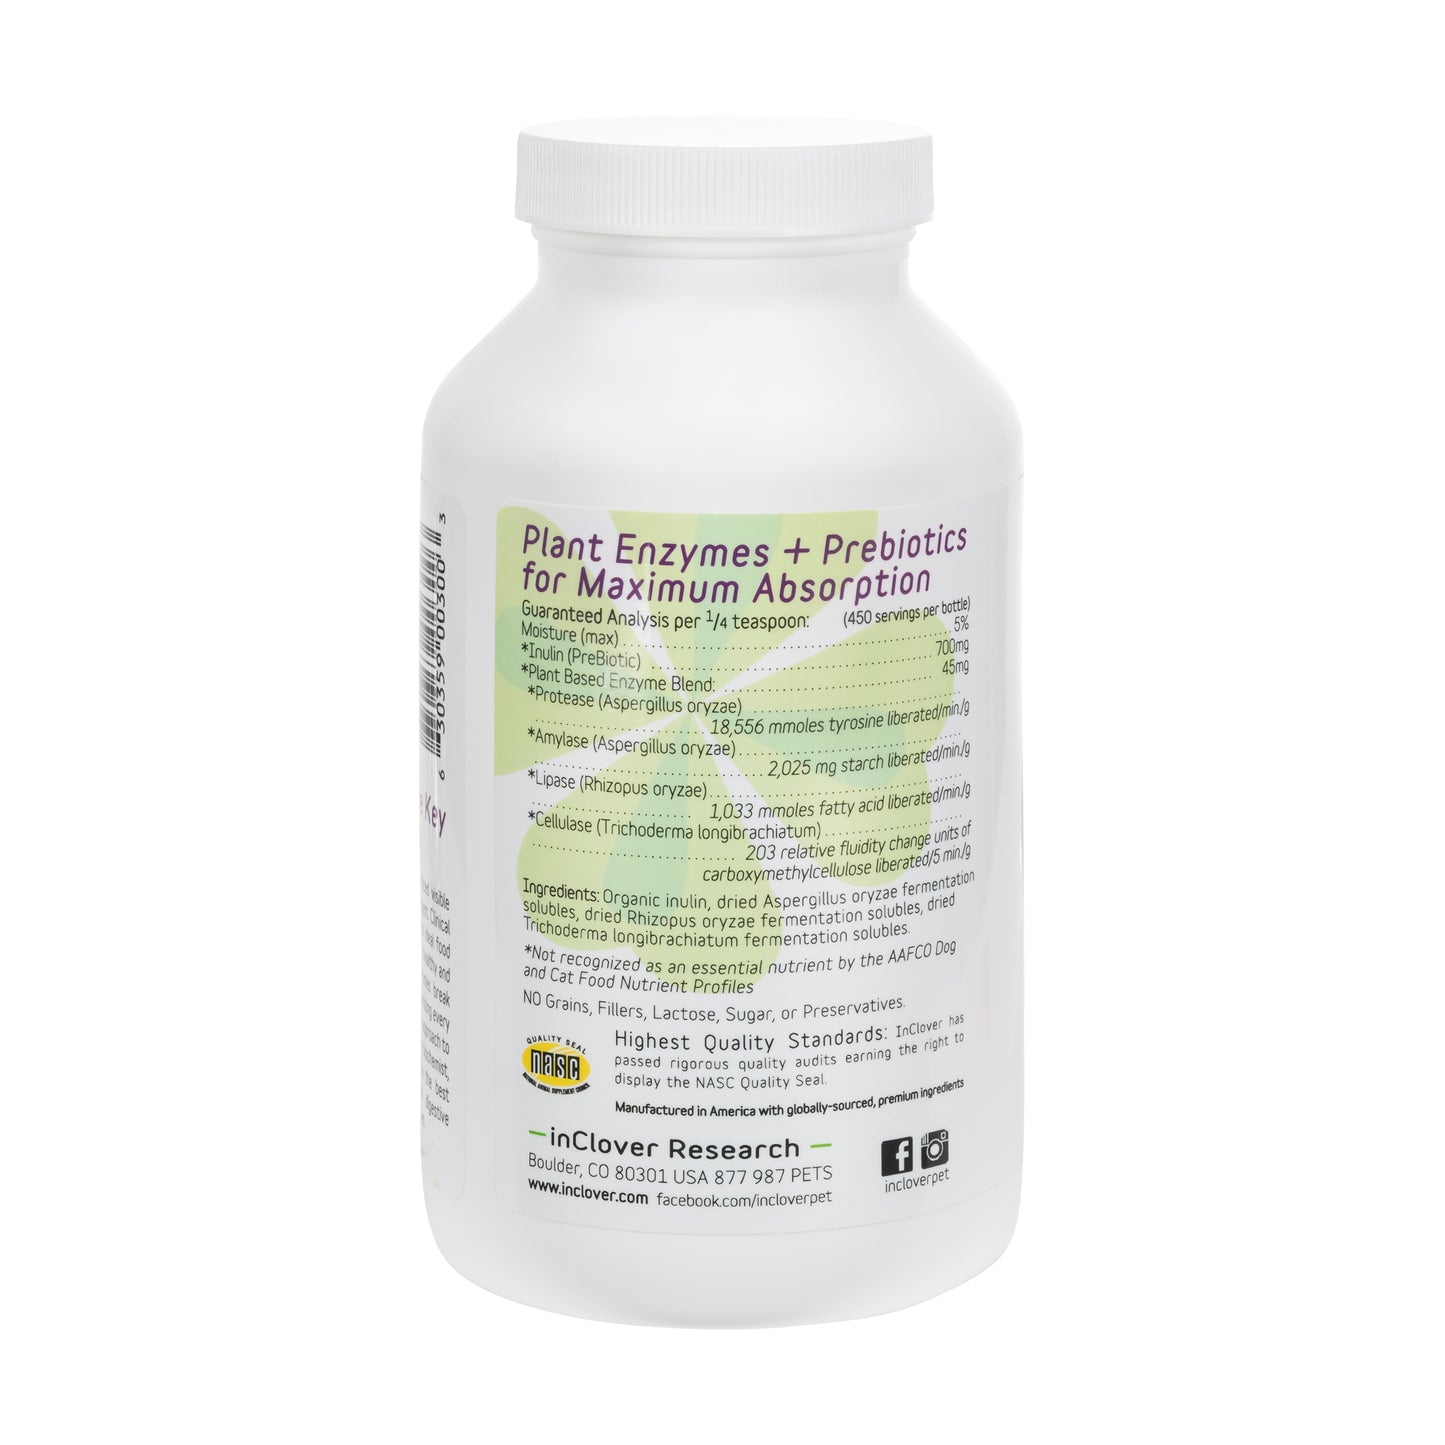 Optagest | Plant Based Prebiotics & Digestive Enzymes for Dogs & Cats